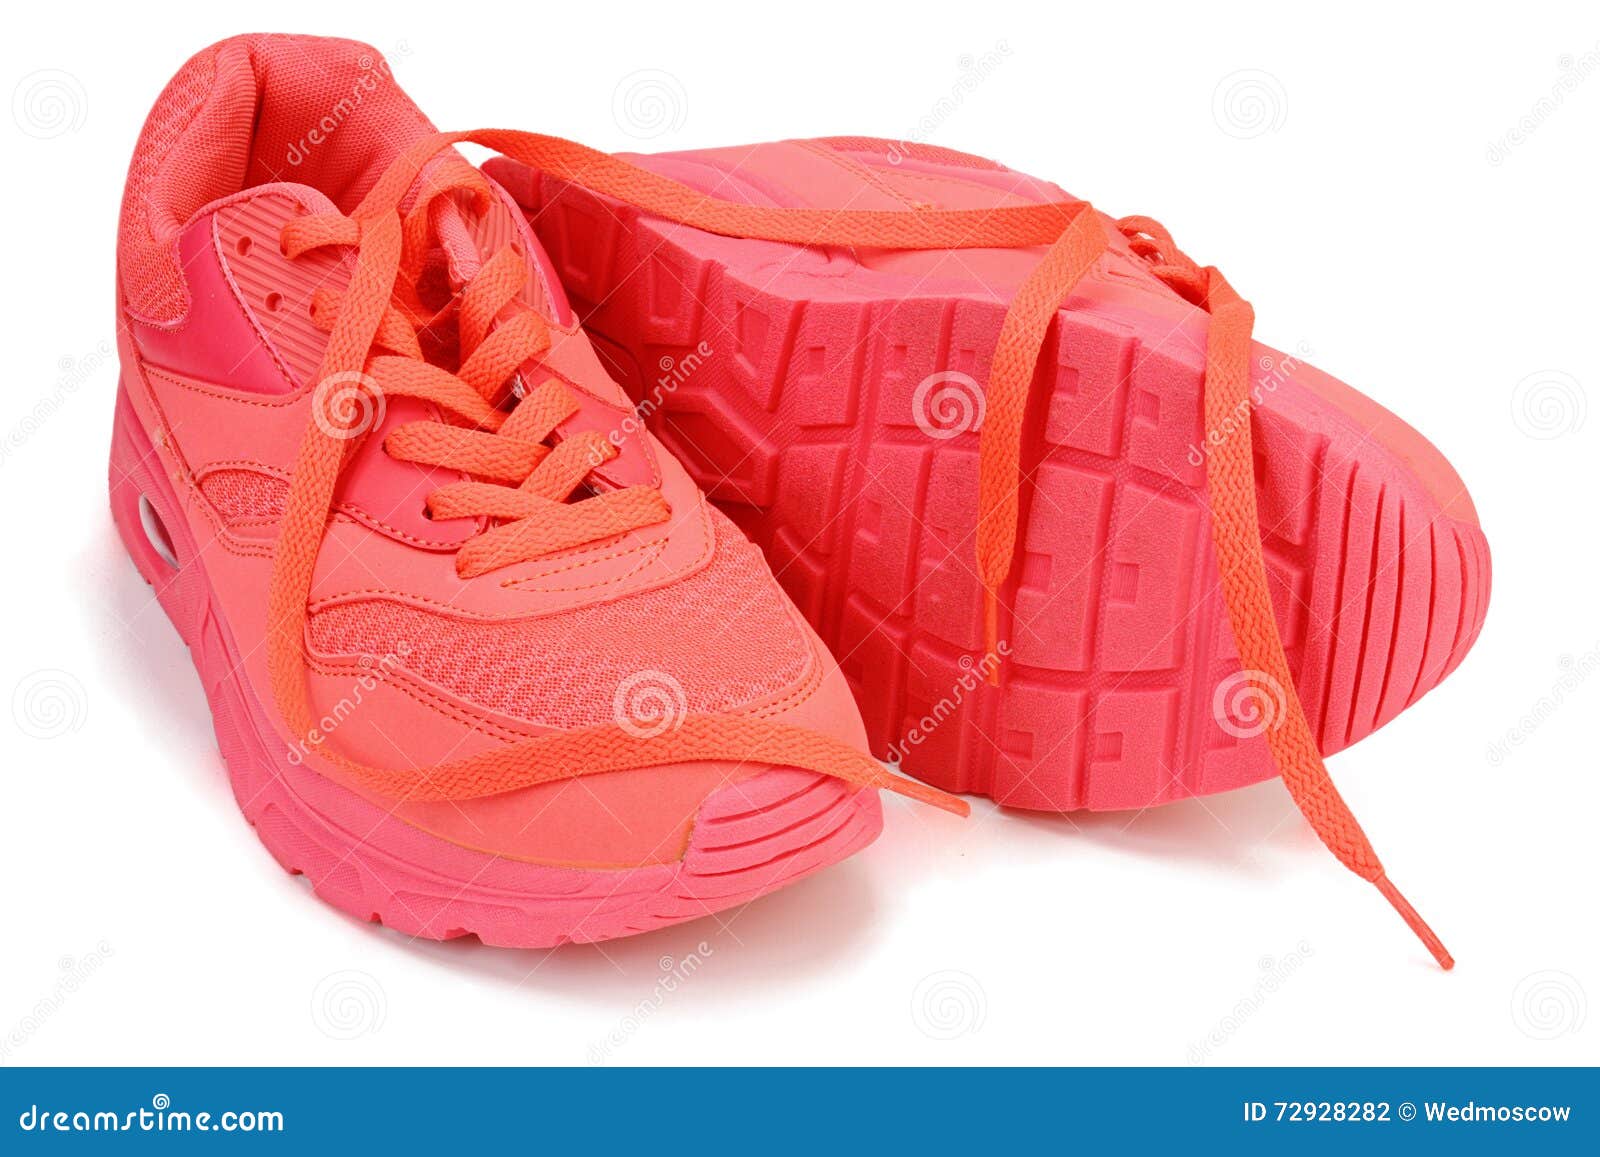 Pink Sneakers on White Background Stock Photo - Image of apparel ...